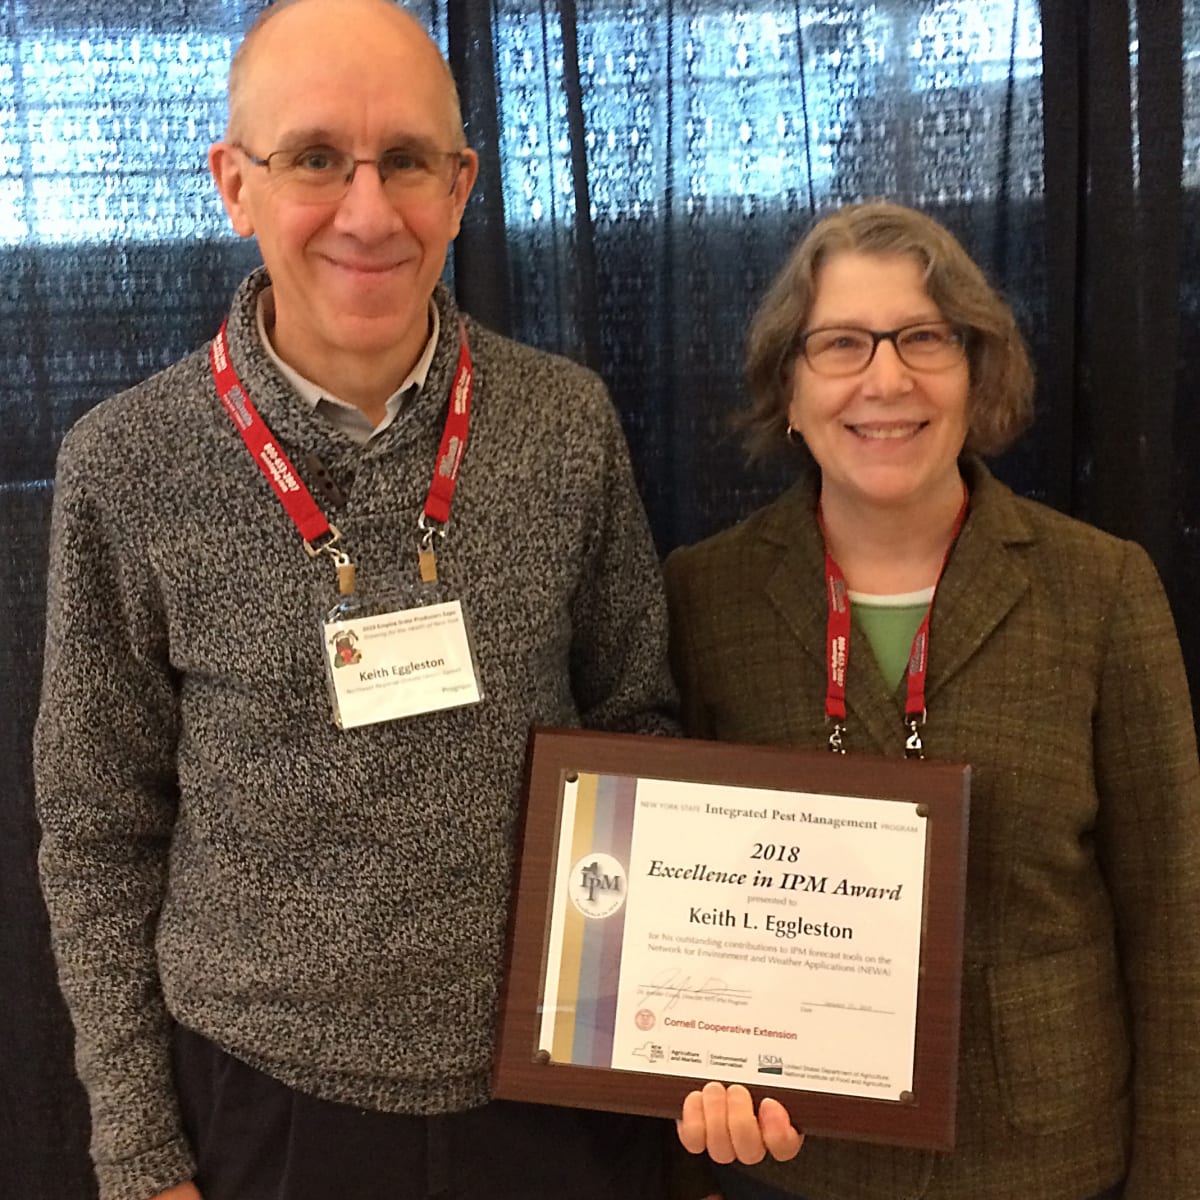 Photo shows Excellence in IPM Award winner Keith L. Eggleston and NYSIPM Fruit IPM Coordinator, Dr. Juliet Carrol